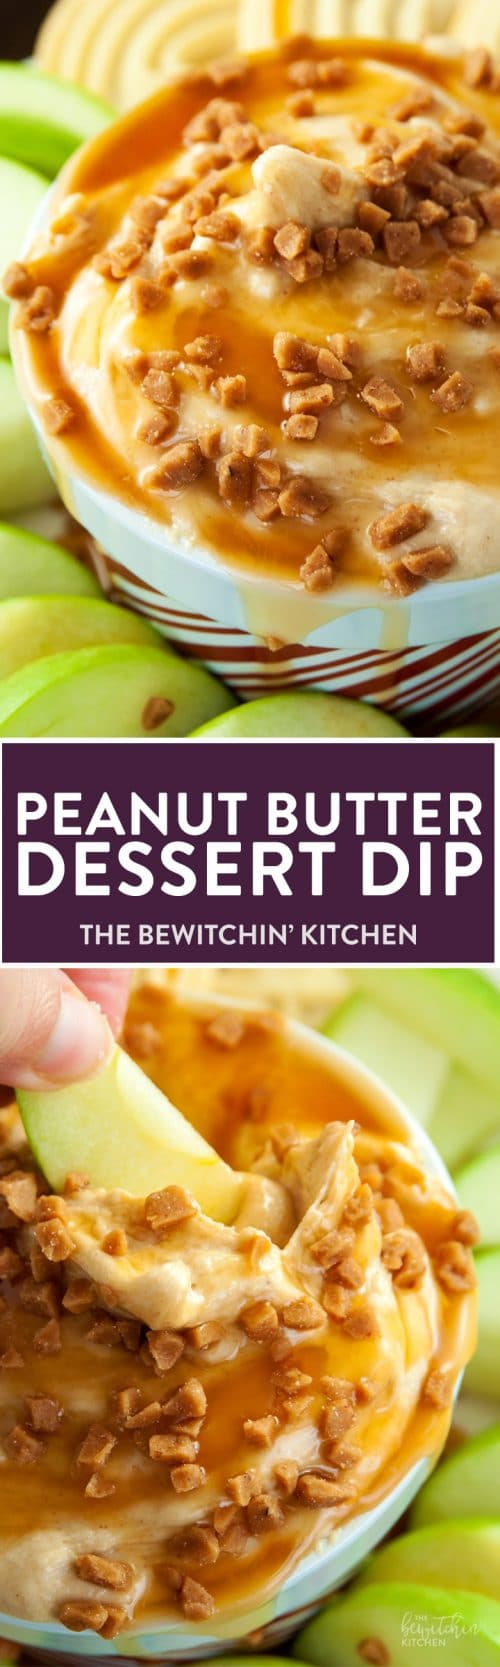 Peanut Butter Dip - calling all peanutbutter lovers! This creamcheese dessert dip is heaven on earth. Goes great with apples or shortbread cookies. I love the crunch of the skor topping too. So darn good! | thebewitchinkitchen.com